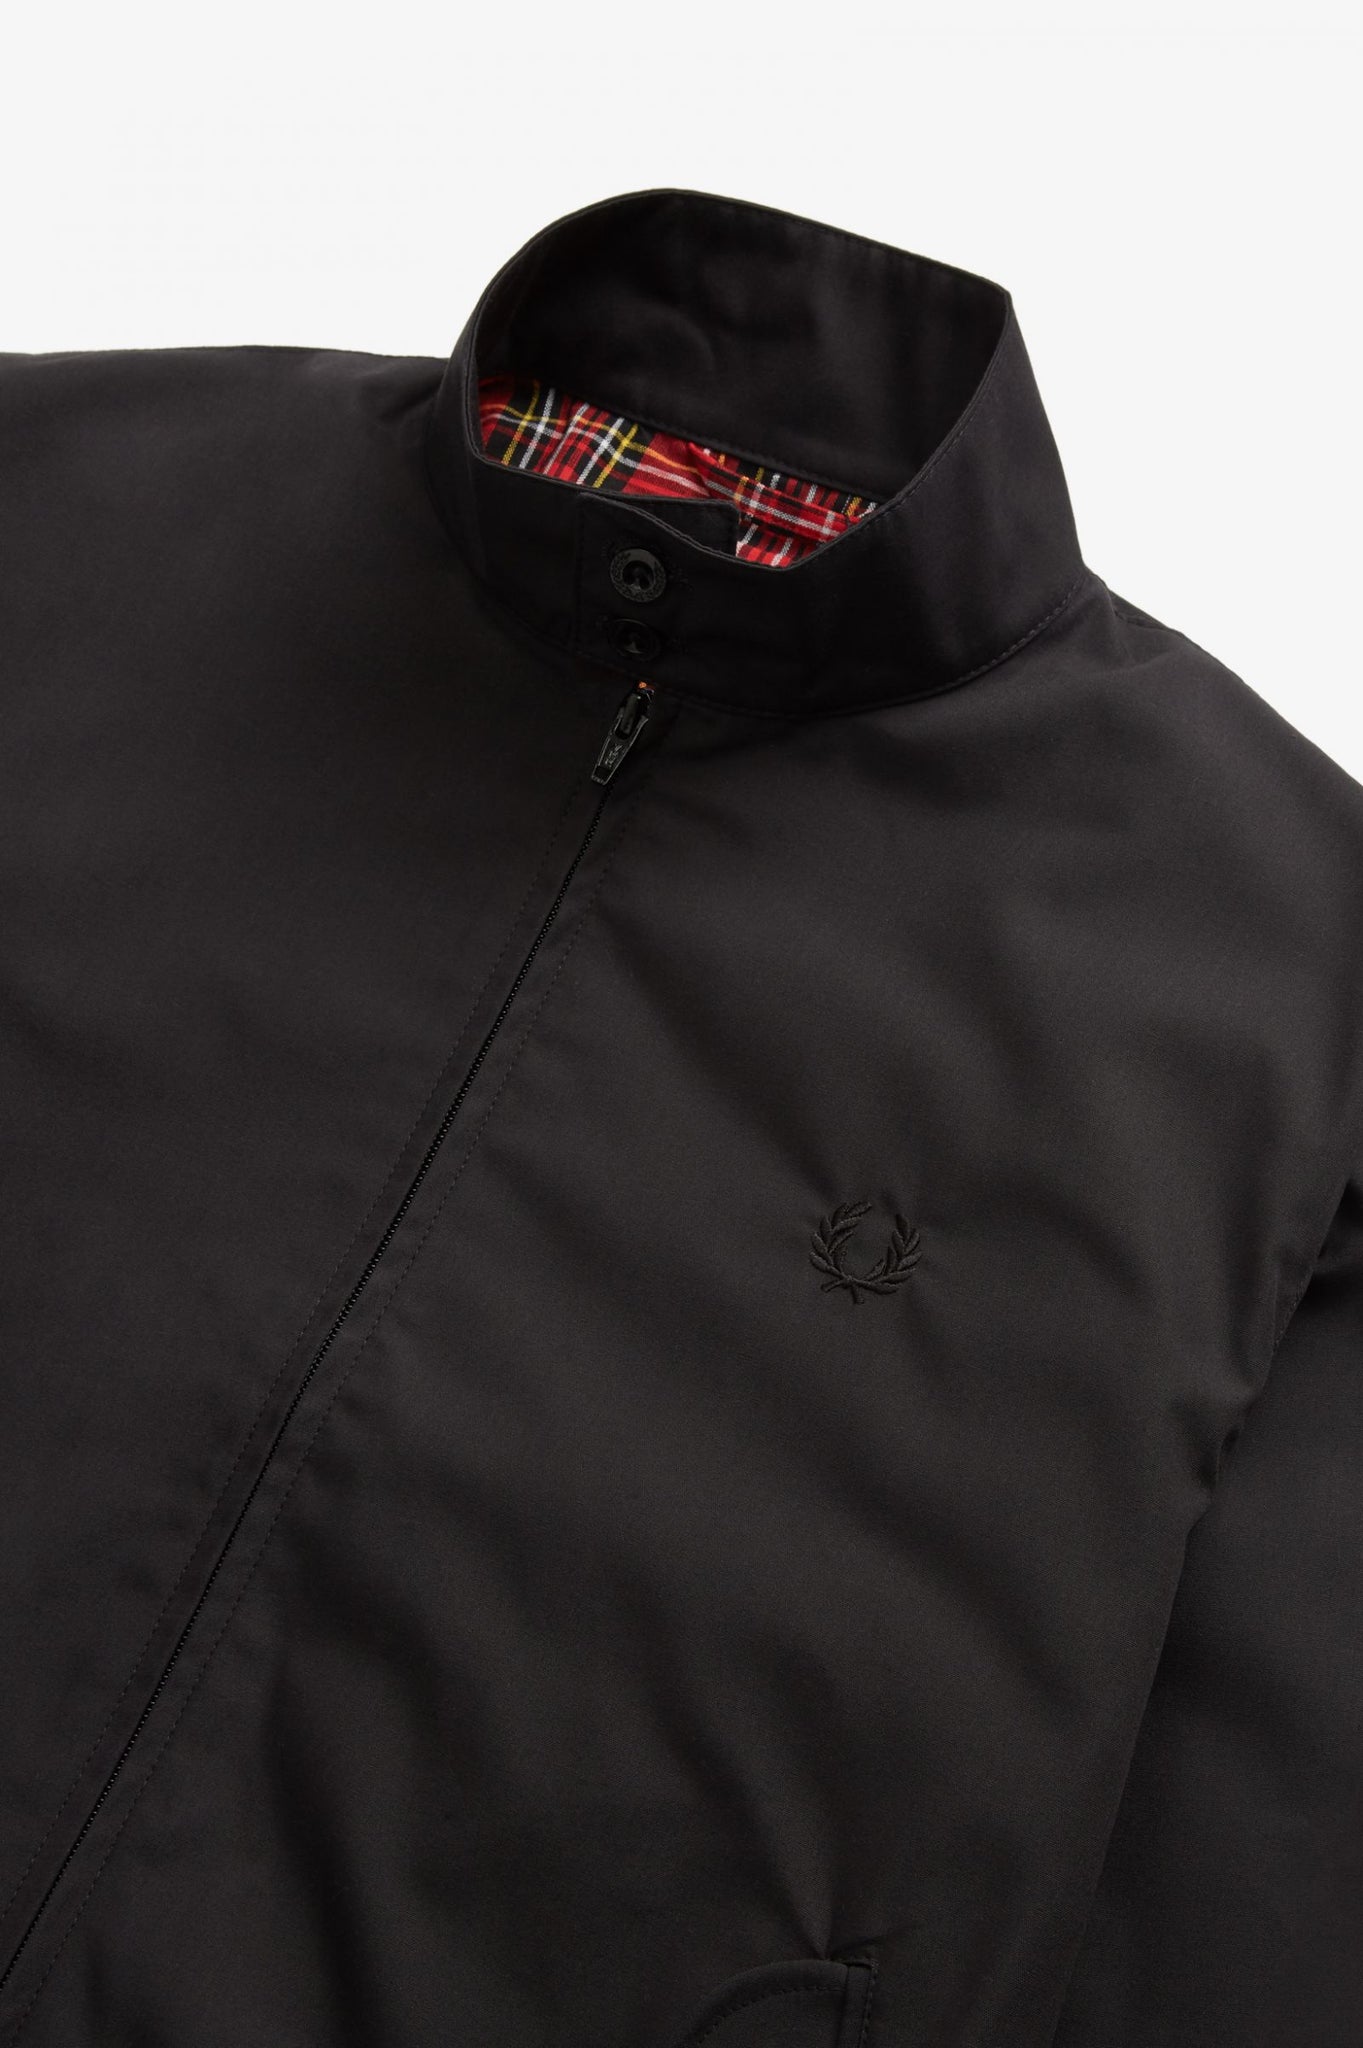 Fred Perry - Made in England Harrington Jacket J7320 in Black